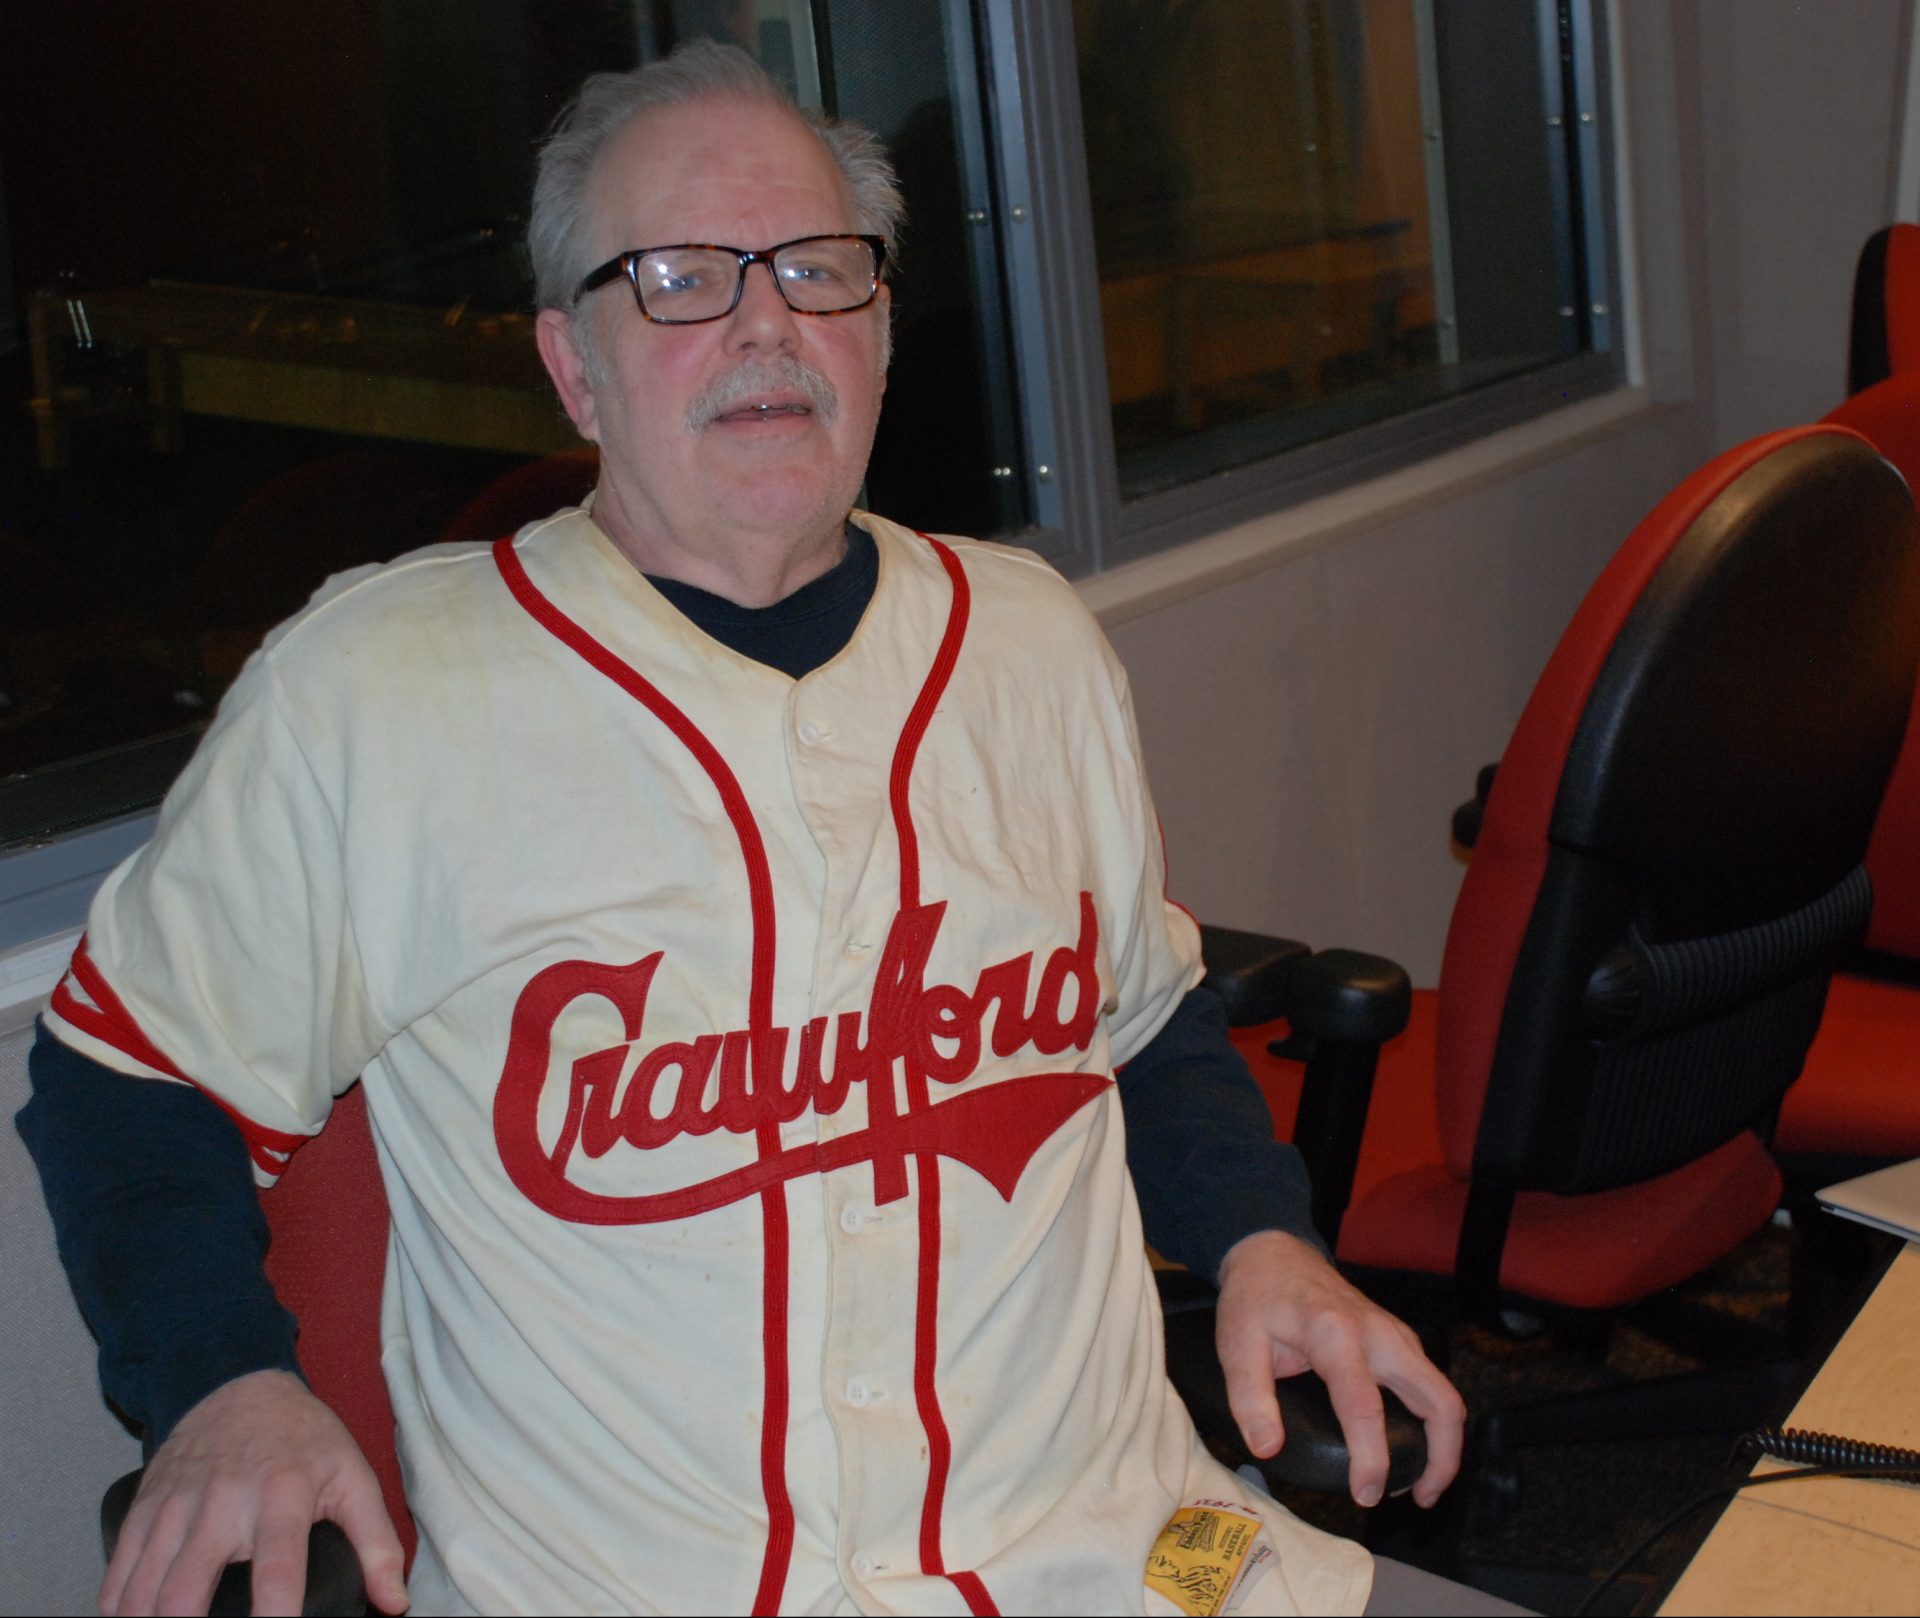 Ted Knorr appears on Smart Talk on February 28, 2020. Mr. Knorr is wearing an authentic jersey from the Negro League Pittsburgh Crawfords.